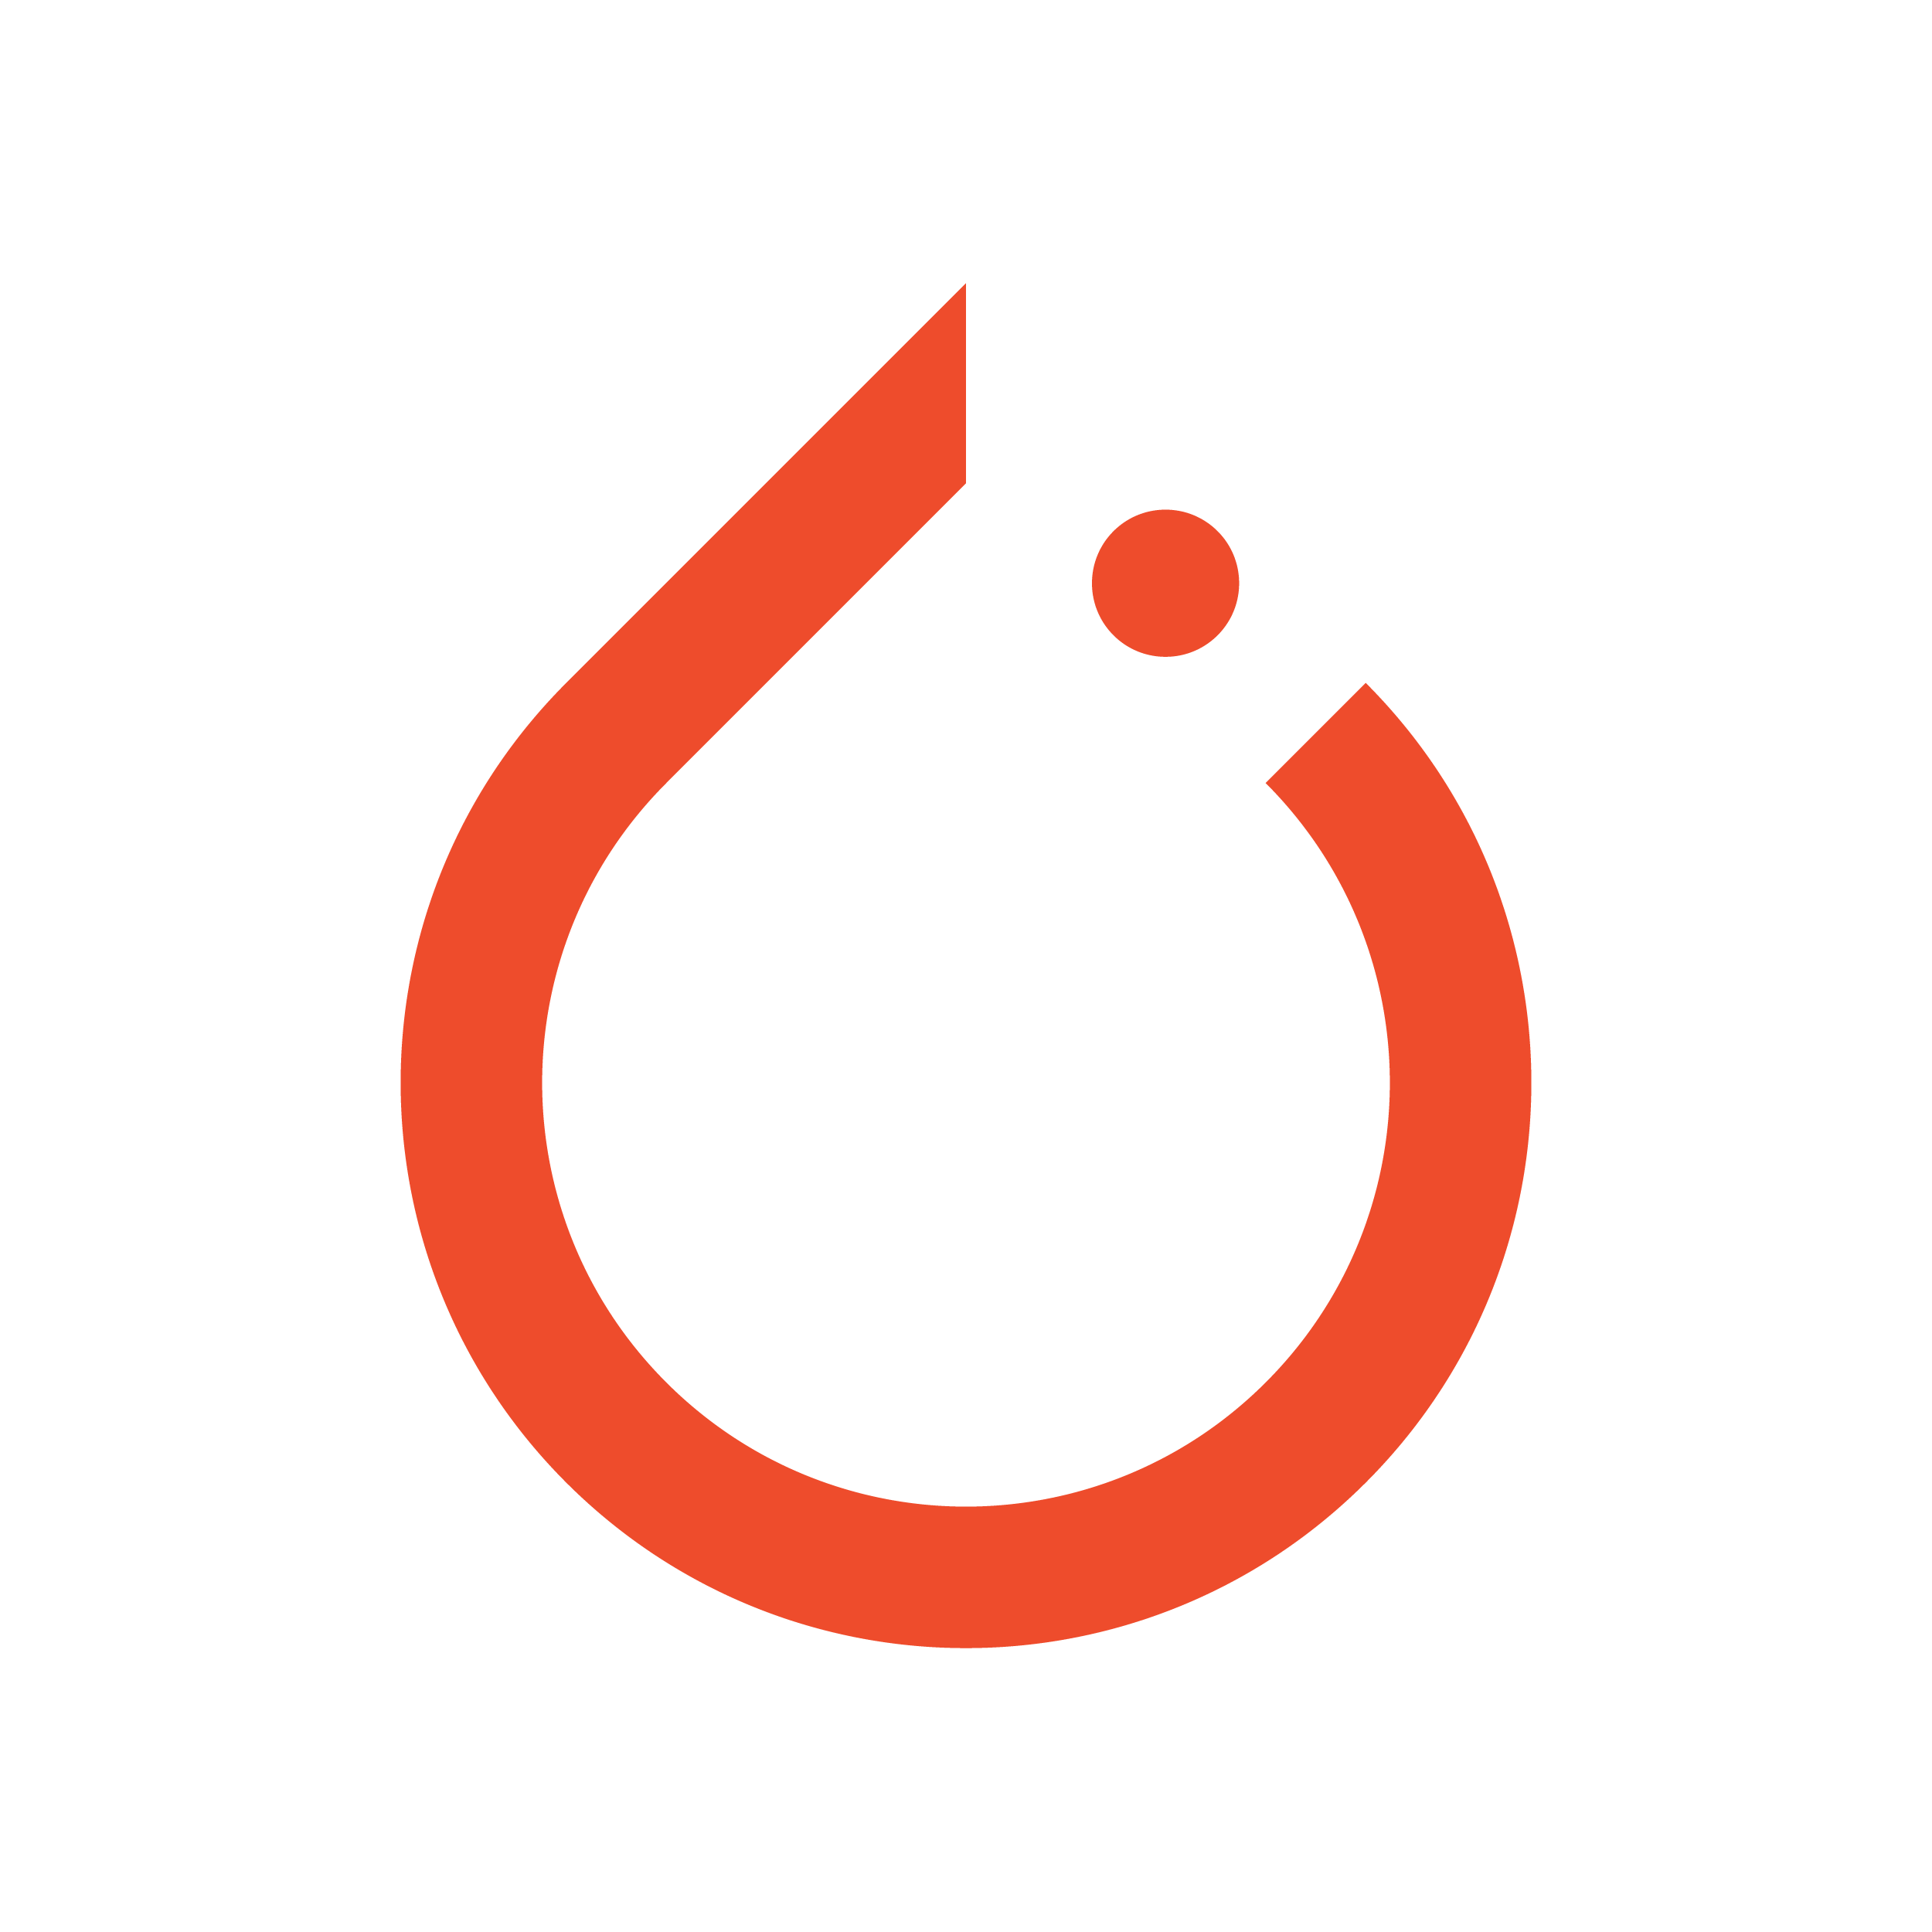 pytorch-logo.png